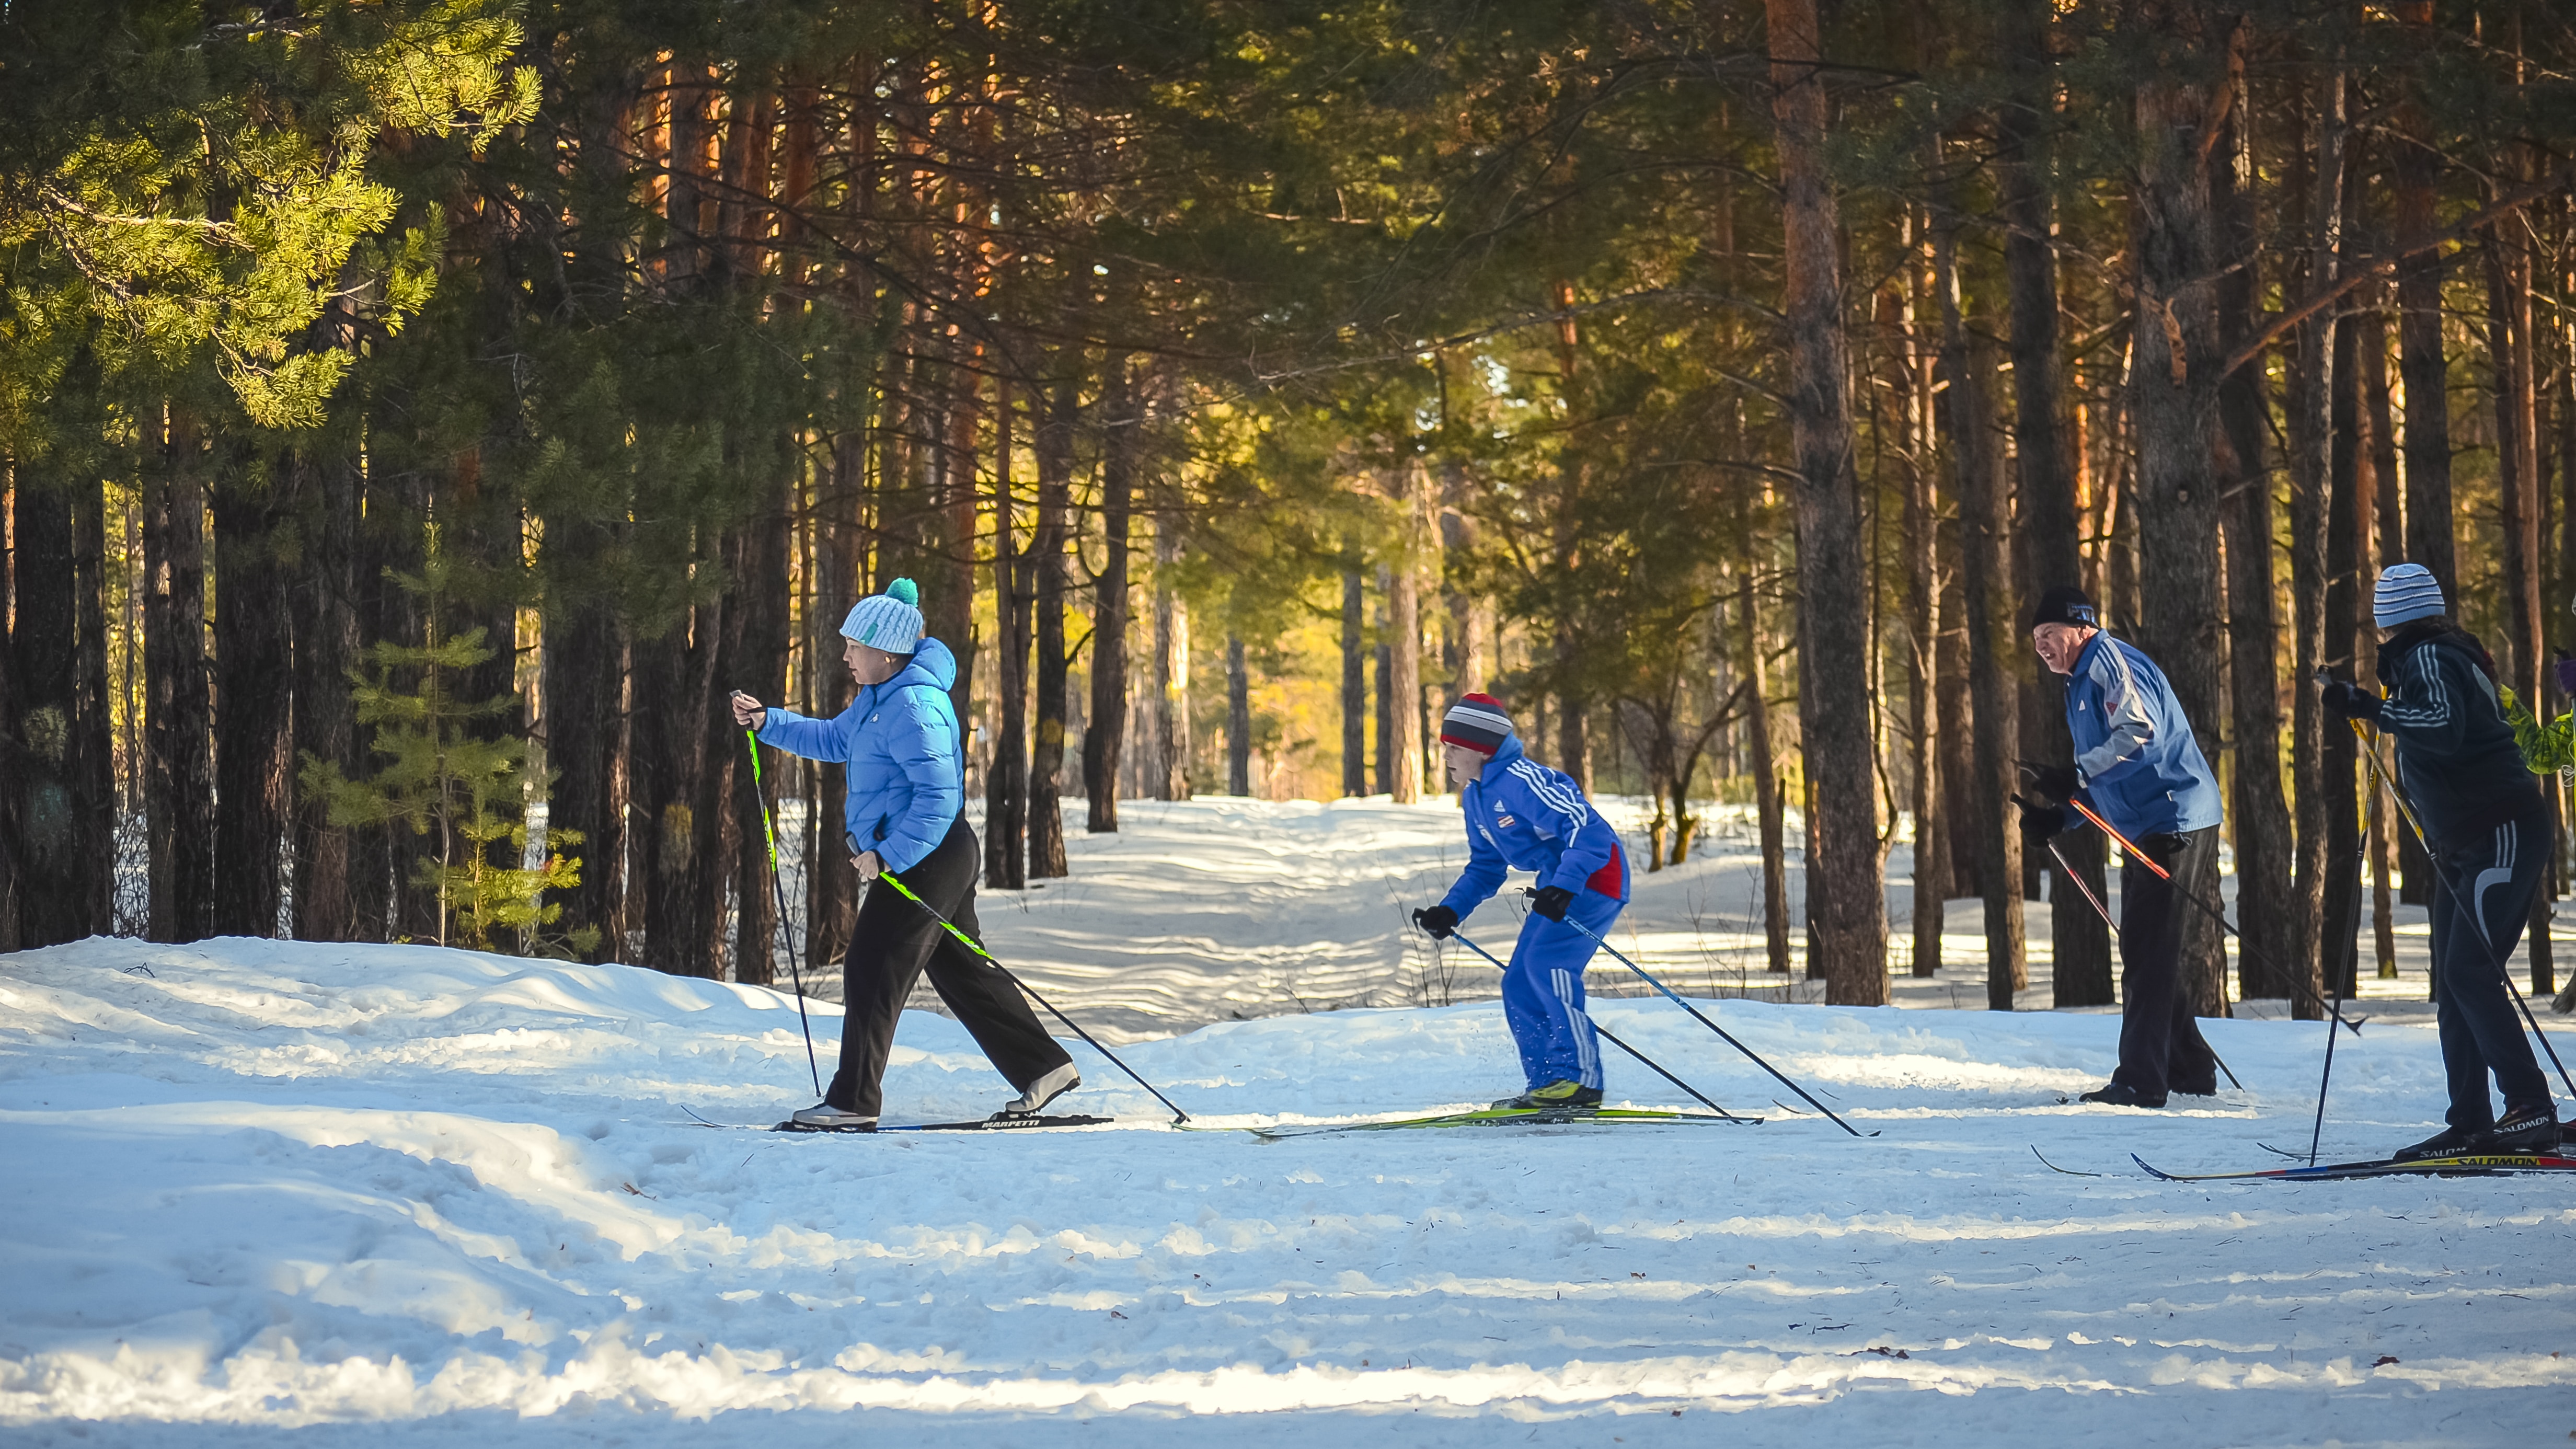 four people skiing on snowfield near green leaved trees during daytime